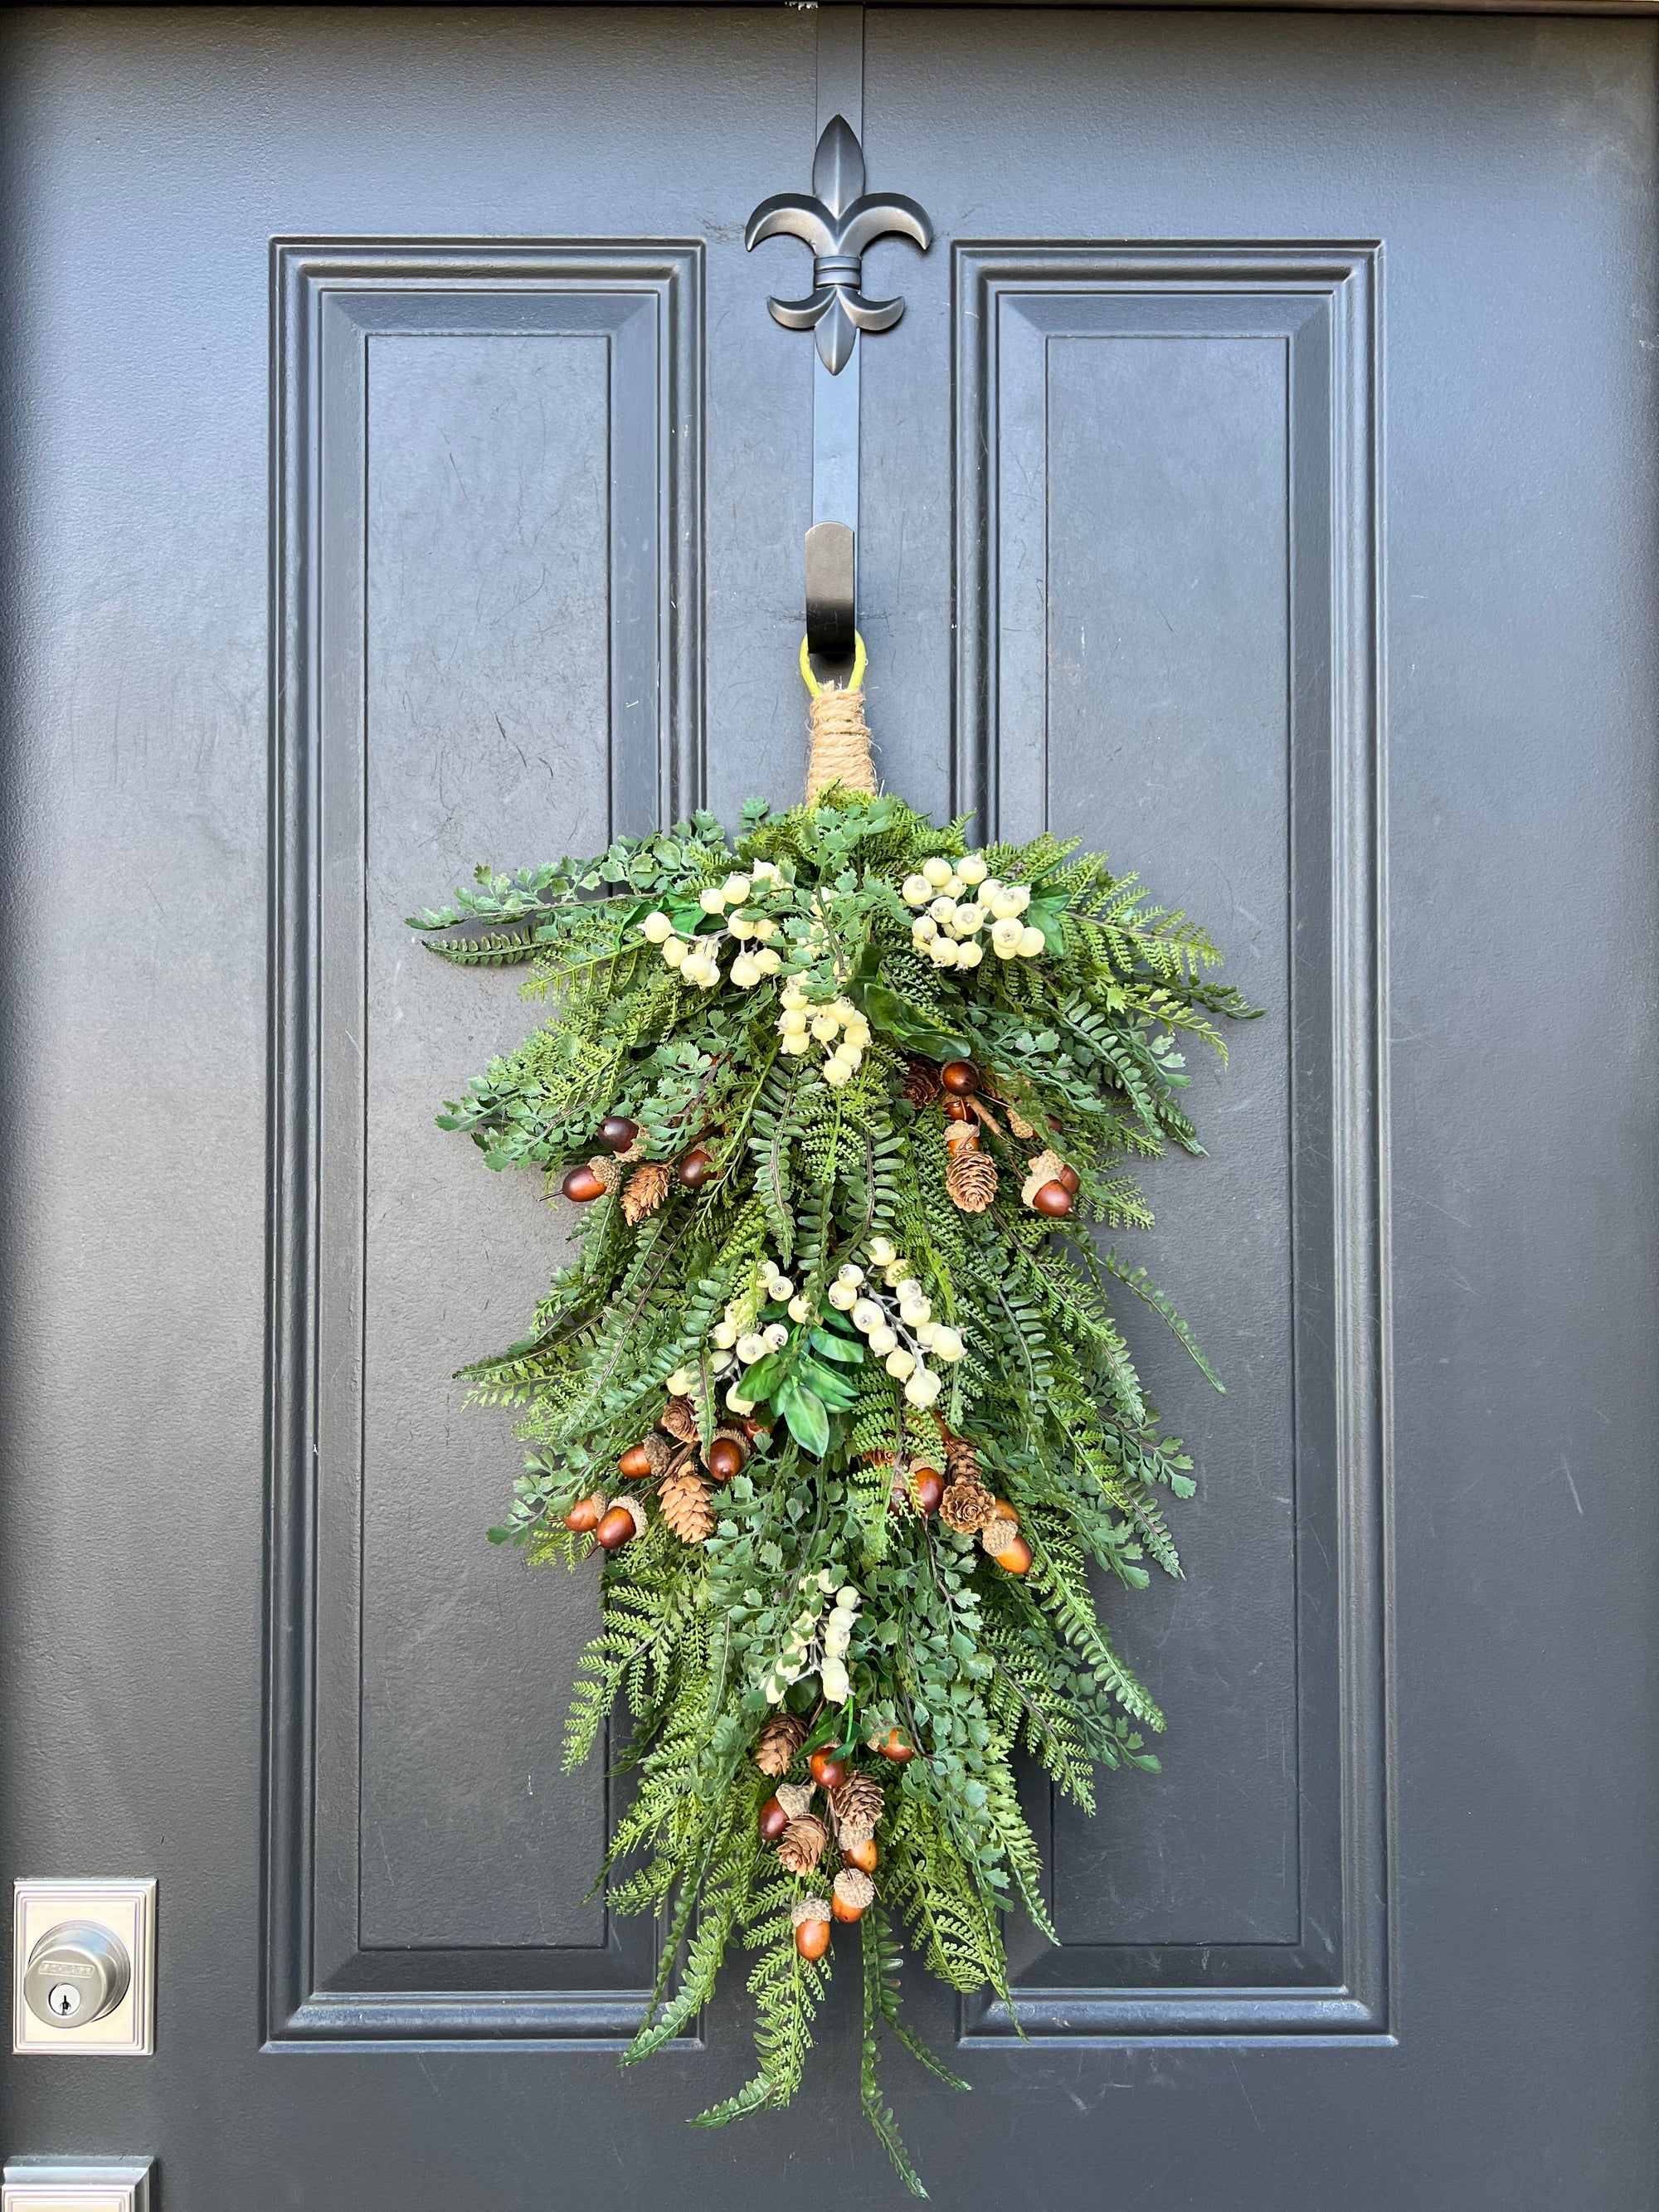 Woodland Fern Teardrop Wreath with Acorn, Pinecones and Cream Berries - Ready to Ship